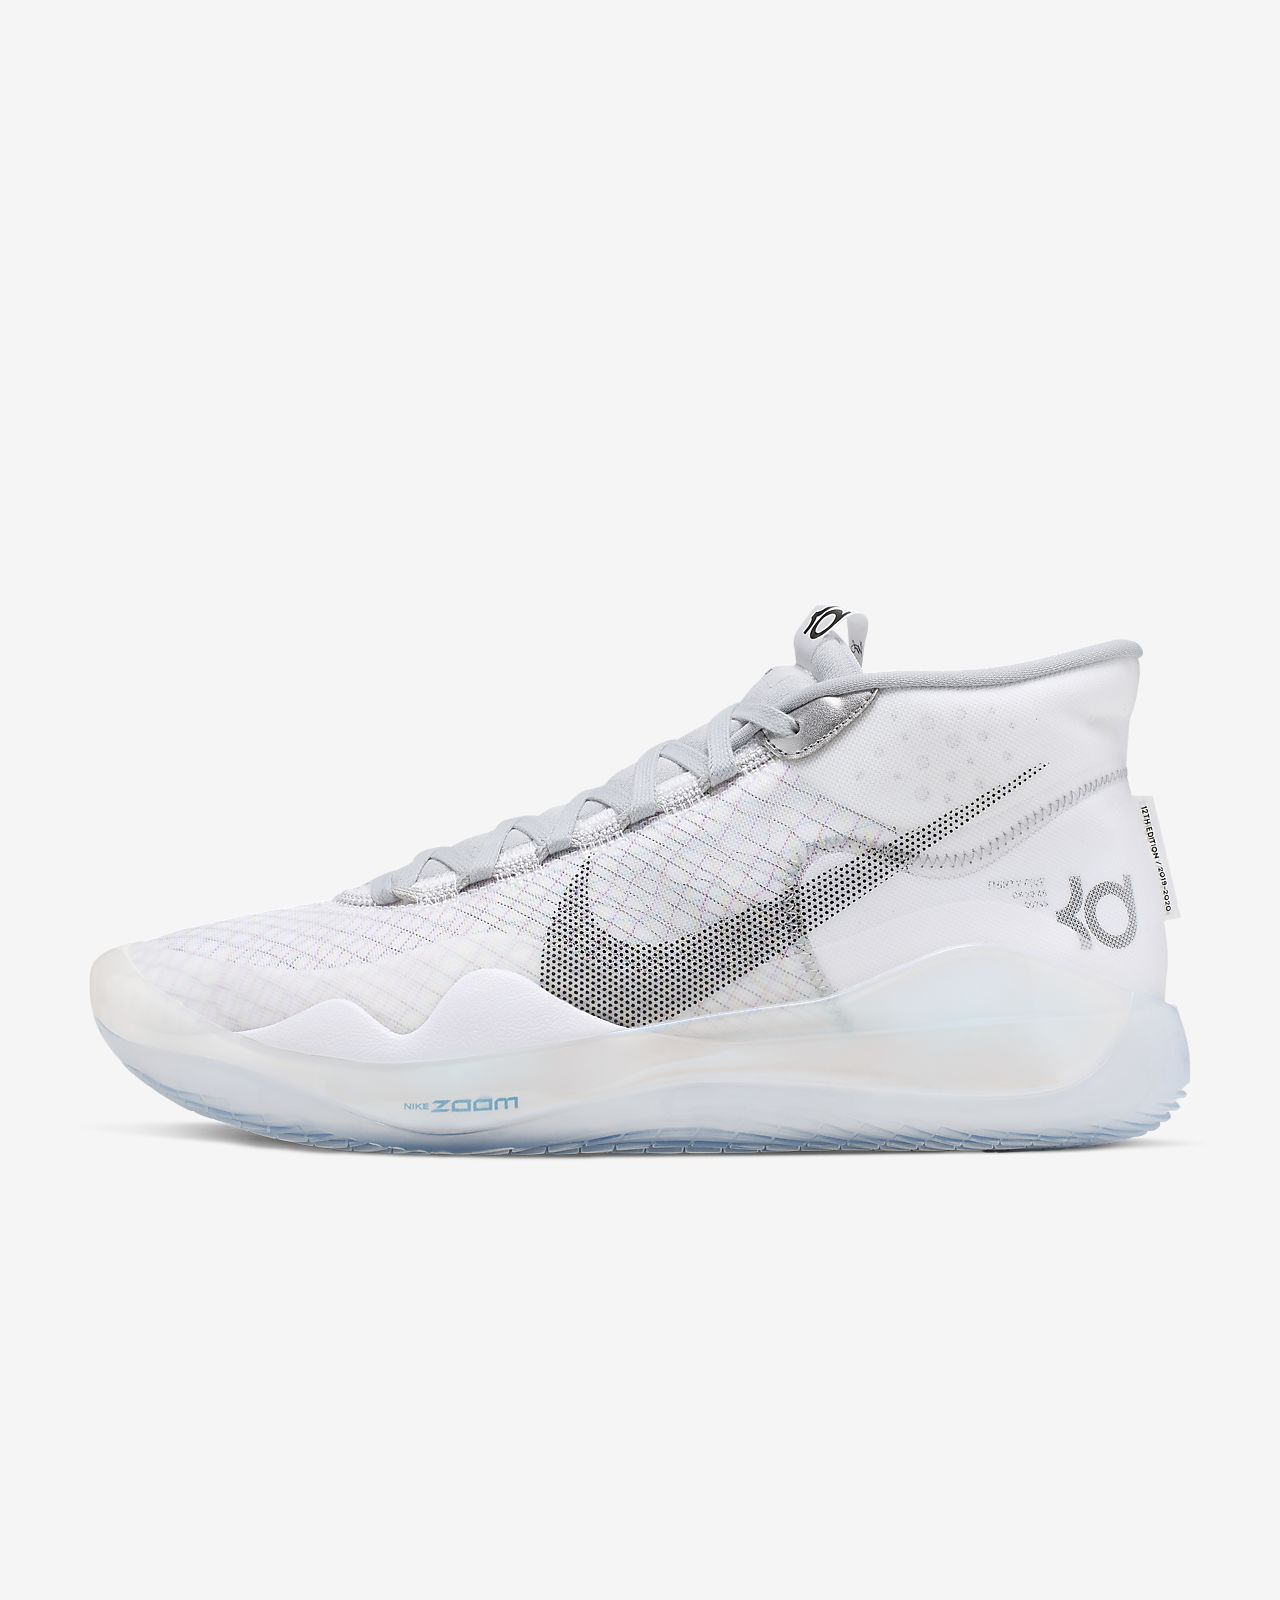 nike by you kd 12